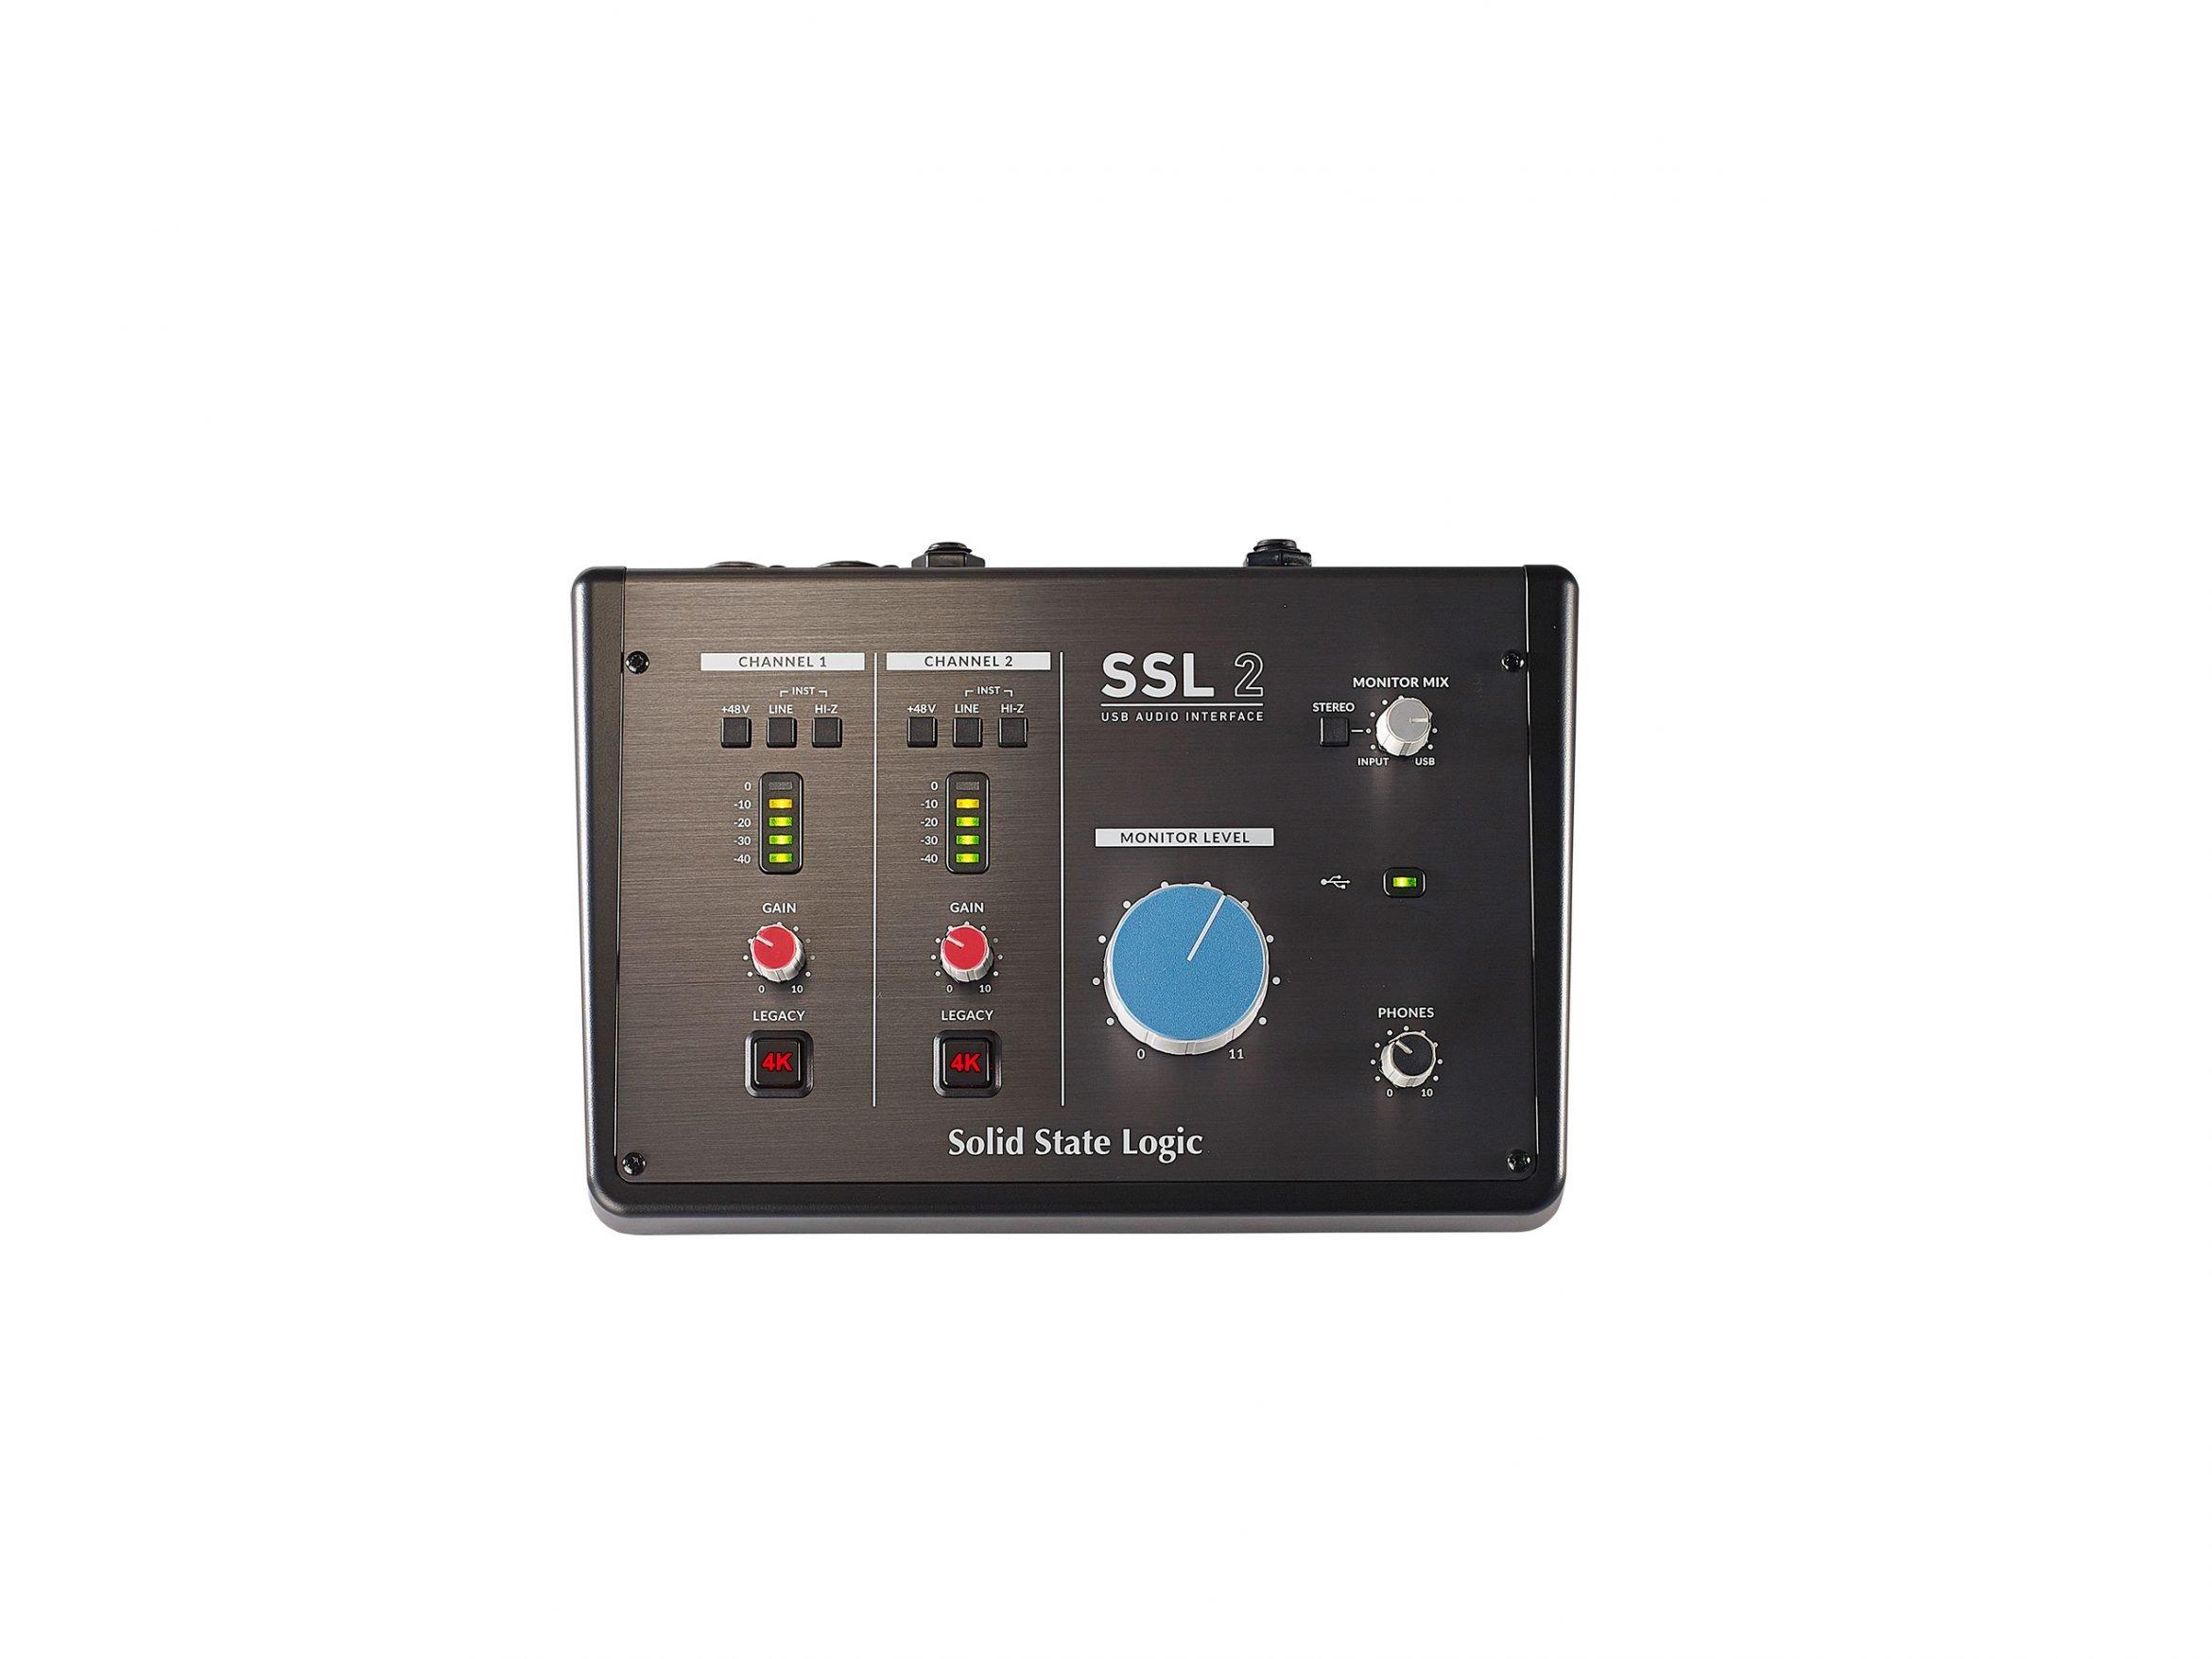 Solid State Logic - SSL 2 Interface zoom out